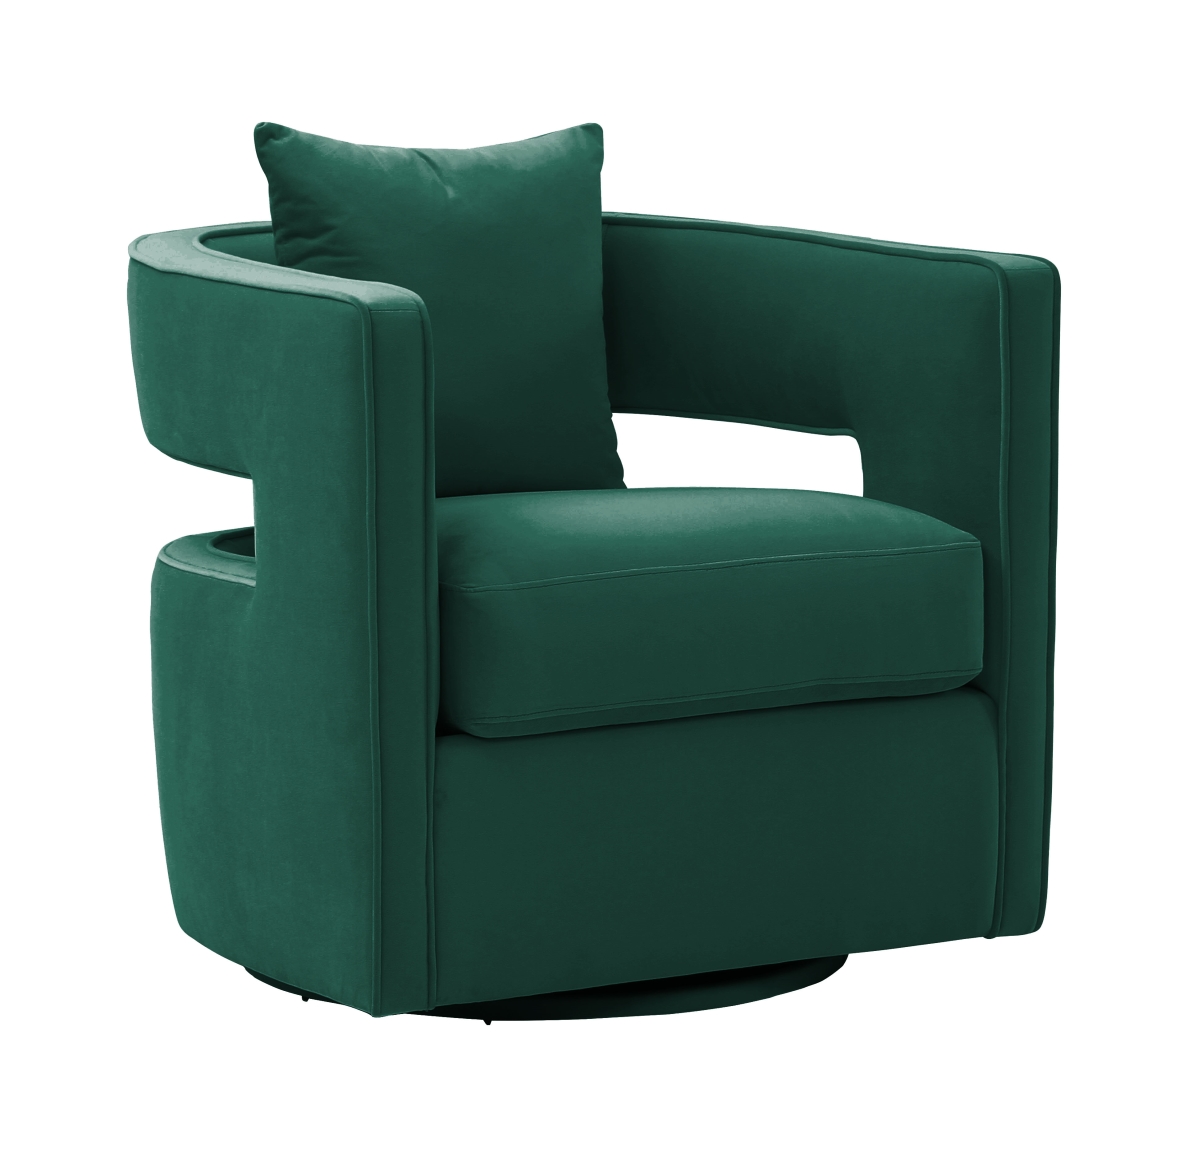 TOV-S44126 Kennedy Forest Green Swivel Chair -  Tov Furniture